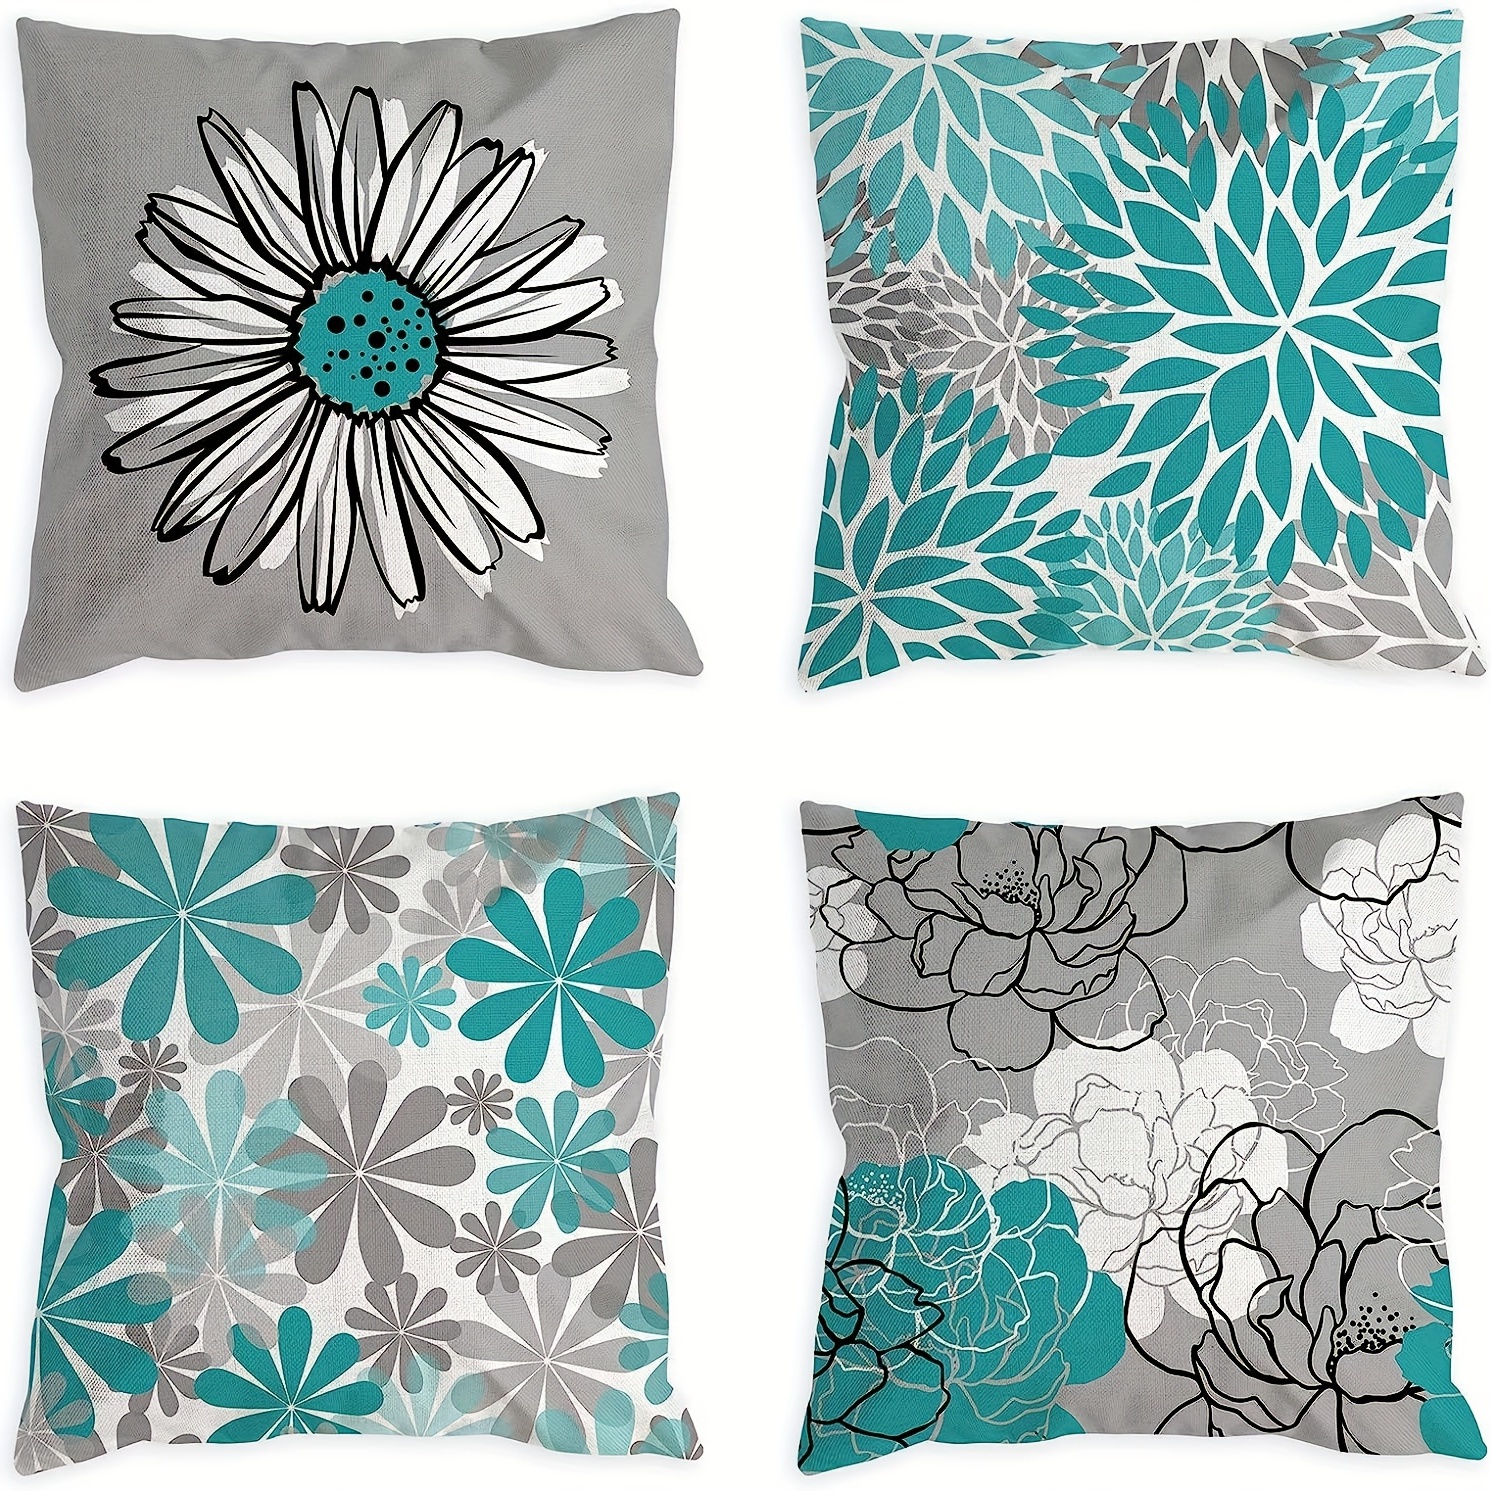 

4pcs Teal Pillow Covers Turquoise And Grey Decorative Throw Pillow Cover For Couch Modern Daisy Pillows Case For Living Room Cushion Bed Outdoor Home Decor 18x18inch